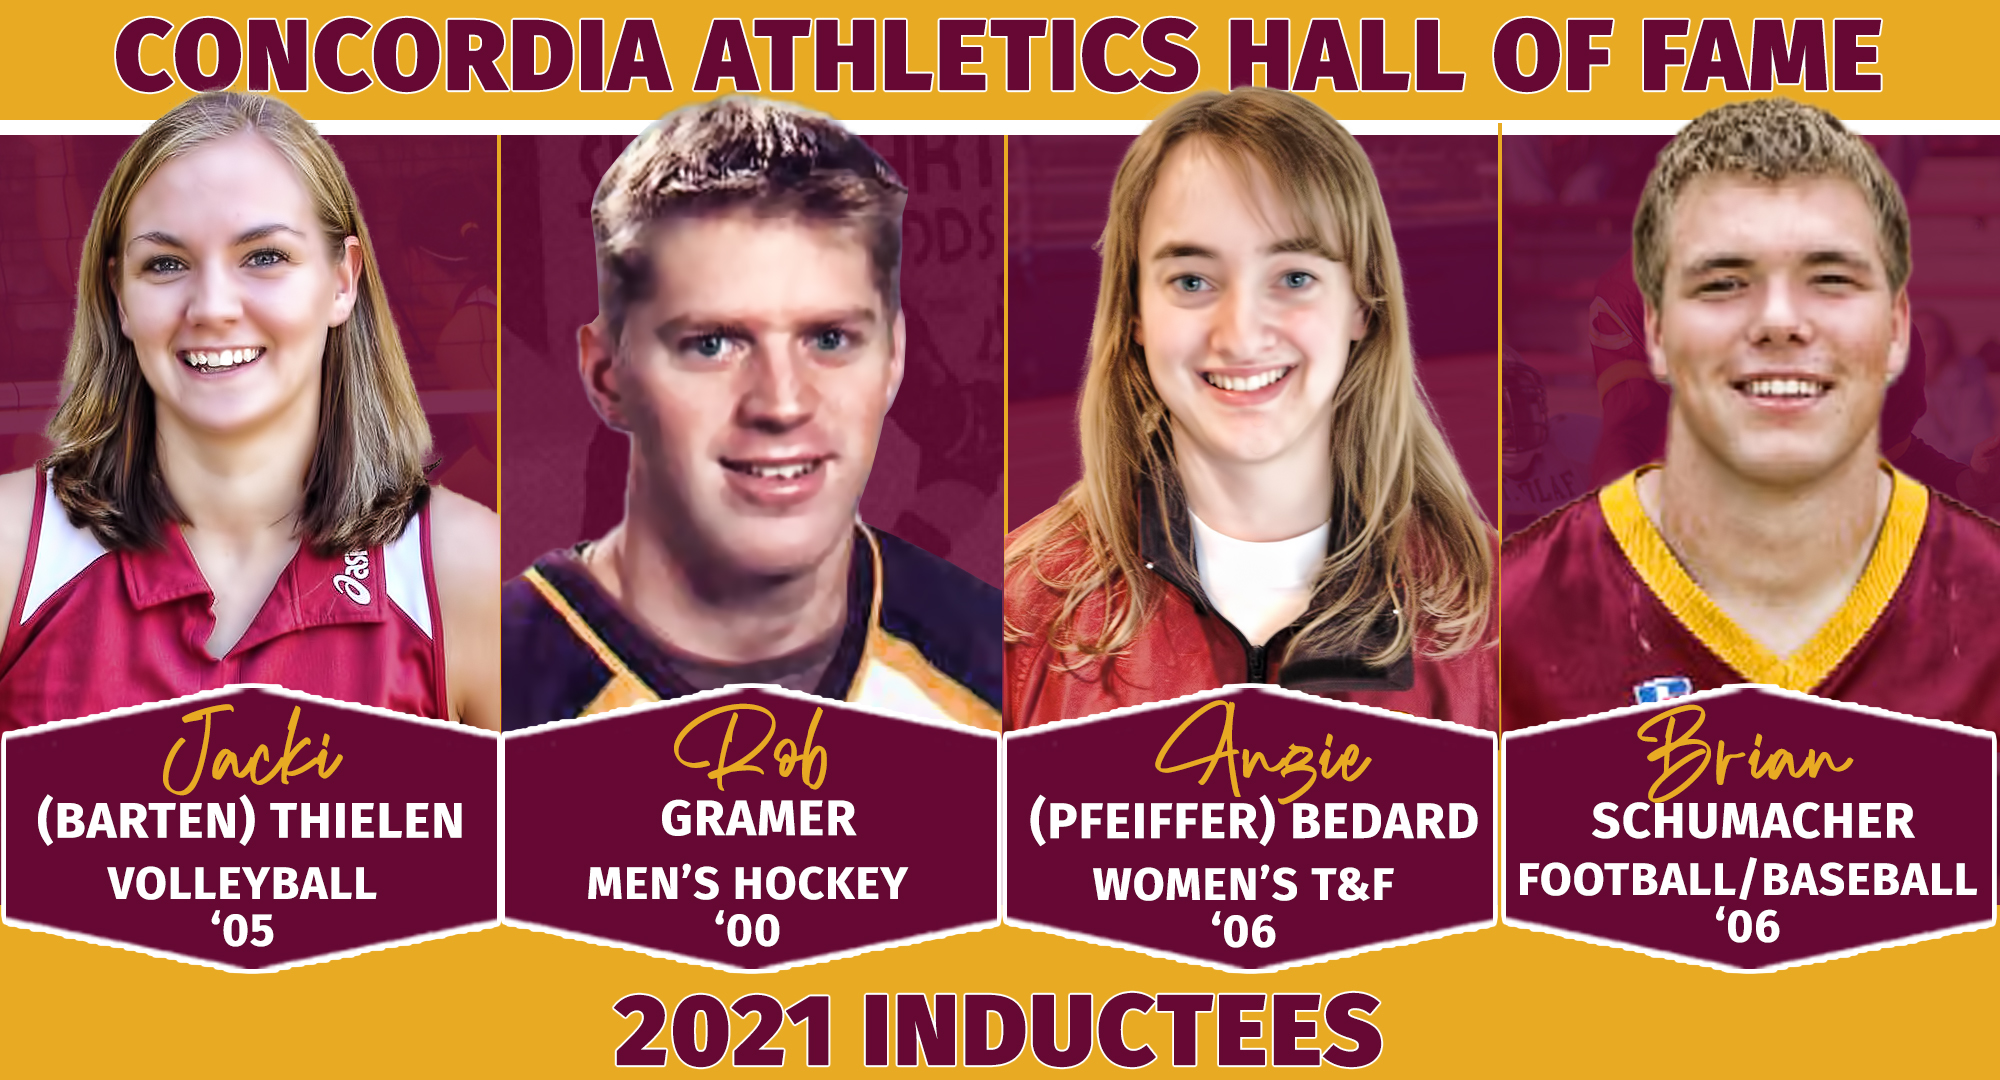 Jackelyn (Barten) Theilen (L), Rob Gramer, Angie (Pfeiffer) Bedard and Brian Schumacher will be inducted into the Concordia Athletic Hall of Fame on Saturday, Oct. 2.